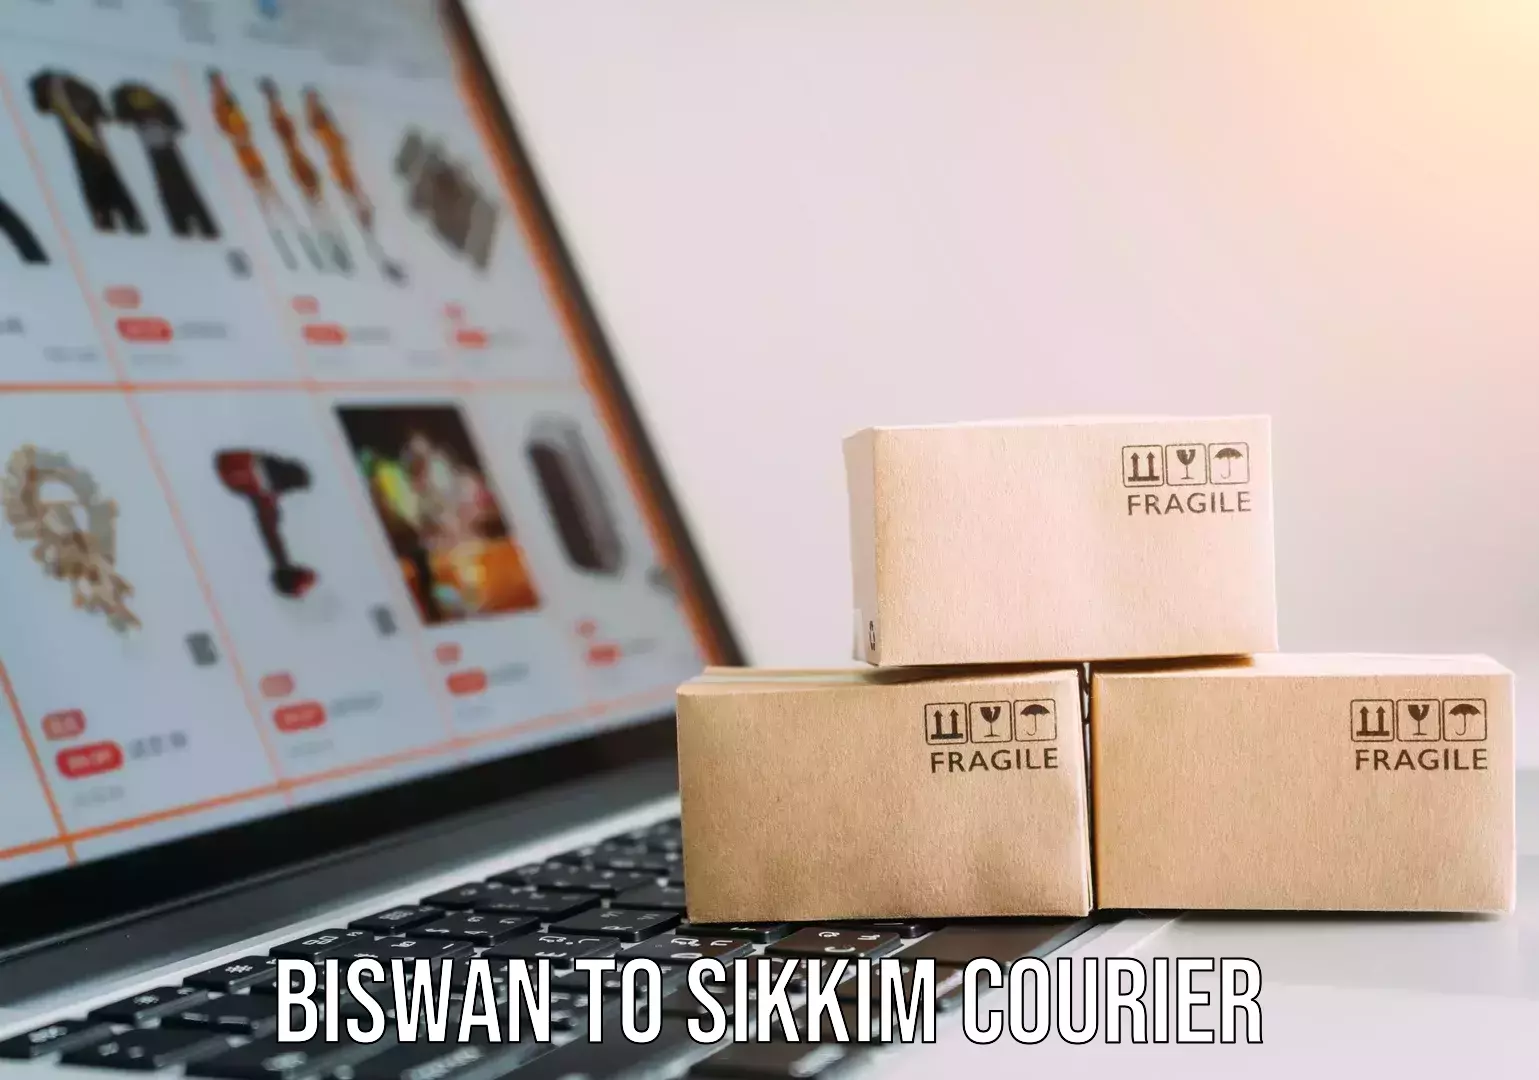 State-of-the-art courier technology Biswan to Sikkim